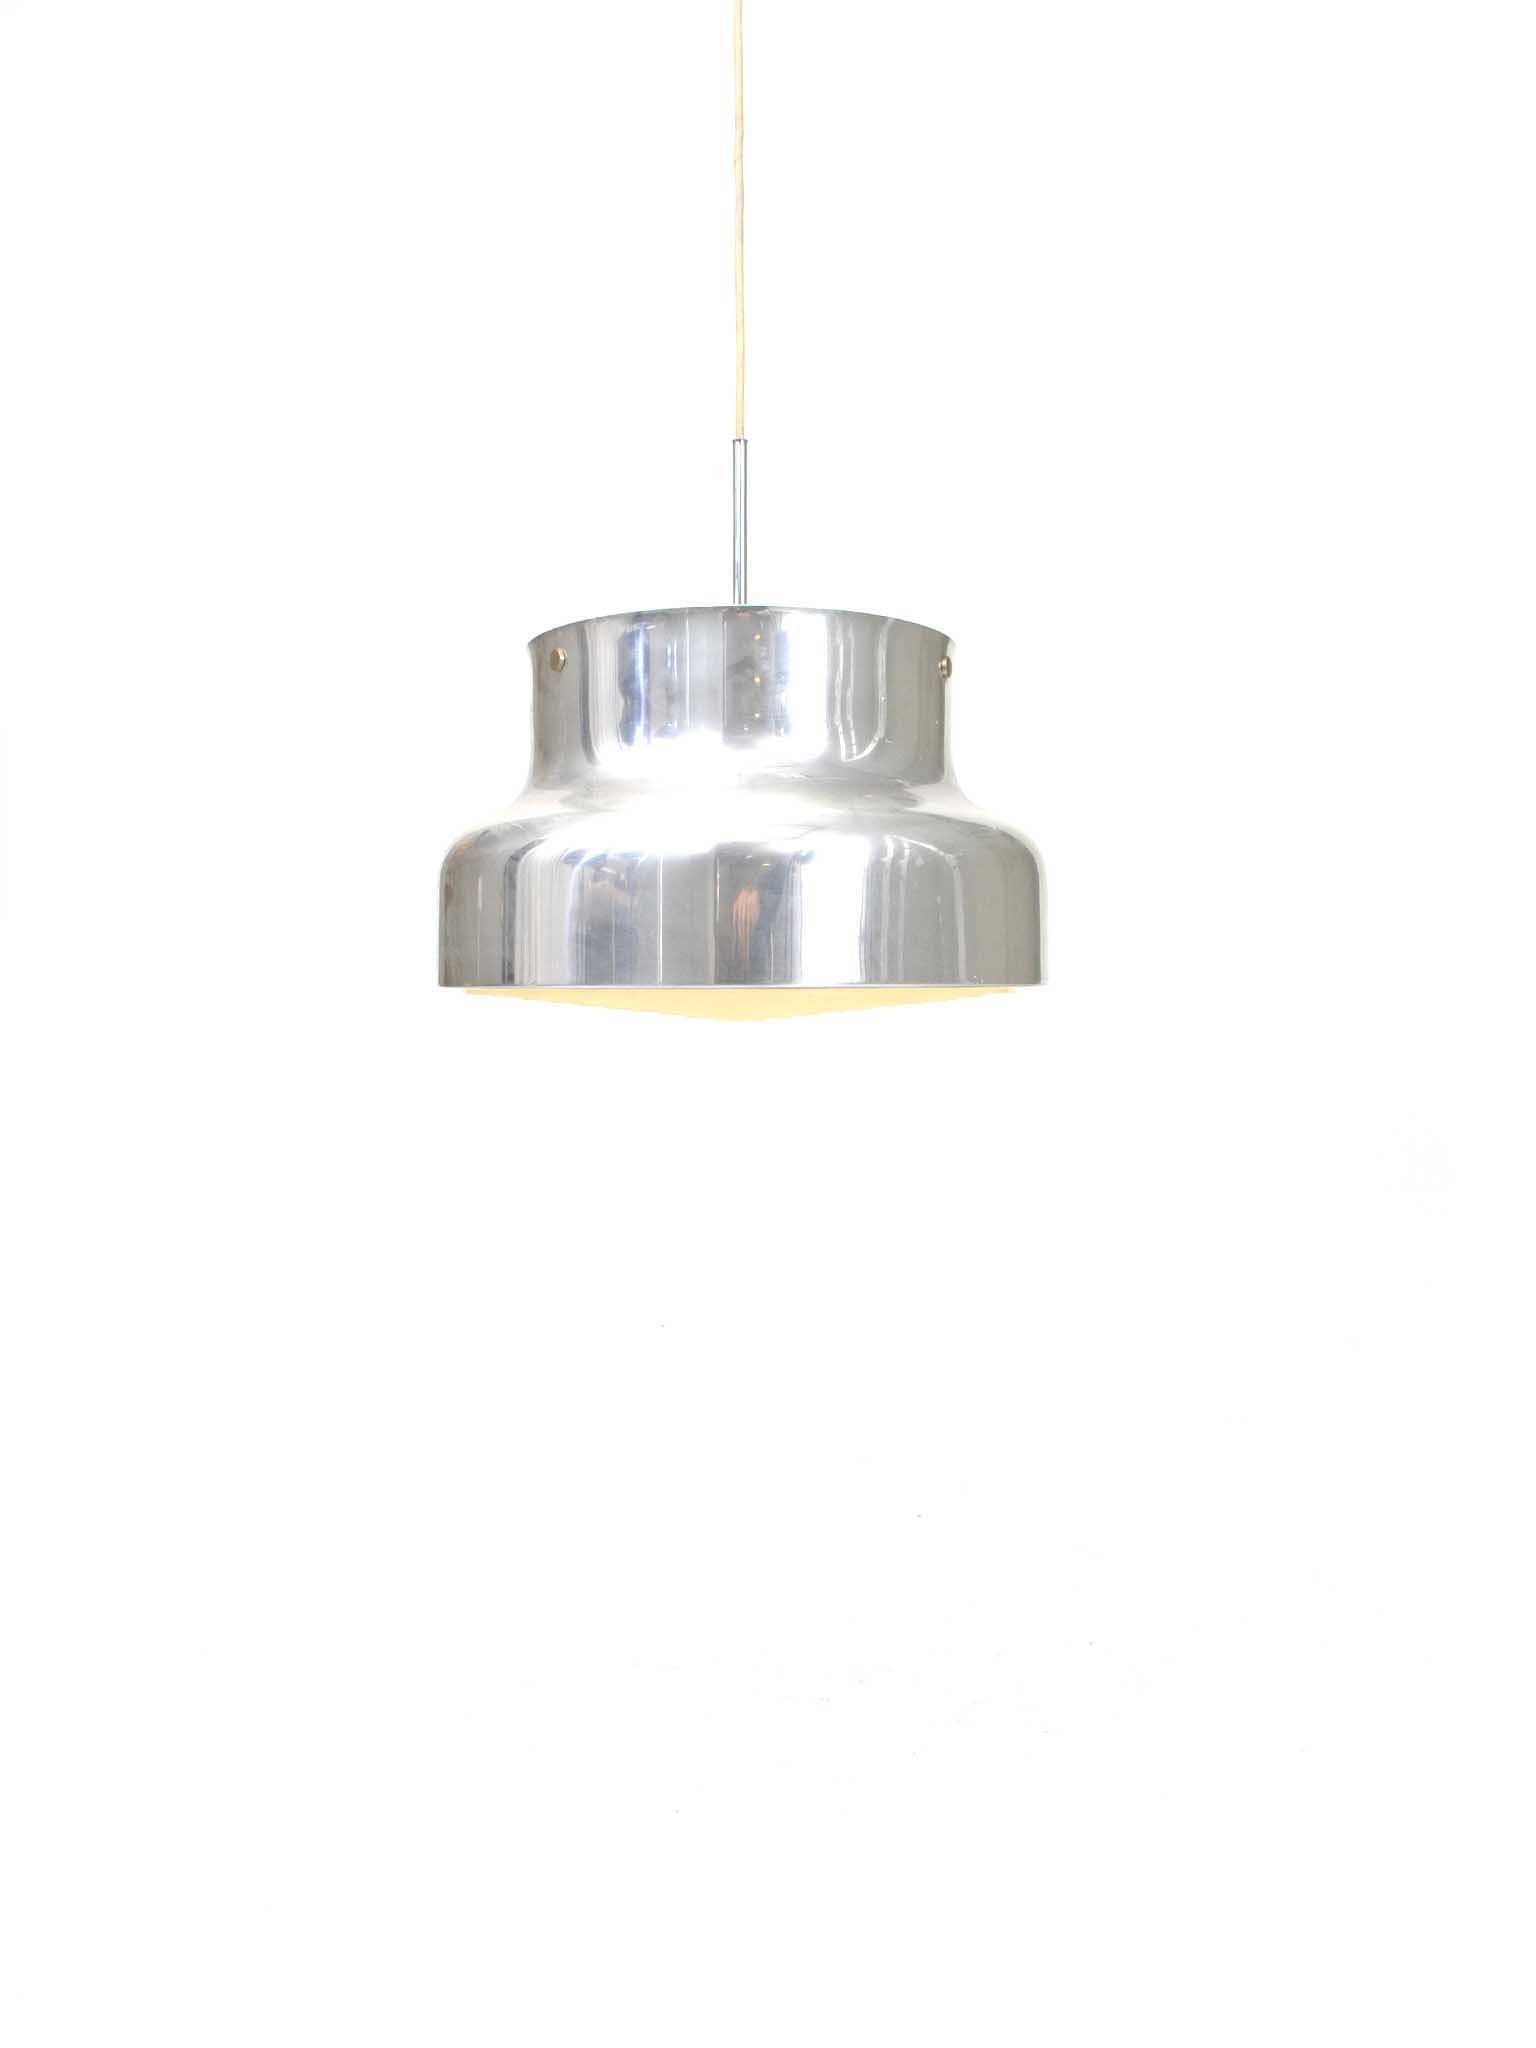 CEILING LAMP ”BUMLING” BY ANDERS PEHRSON